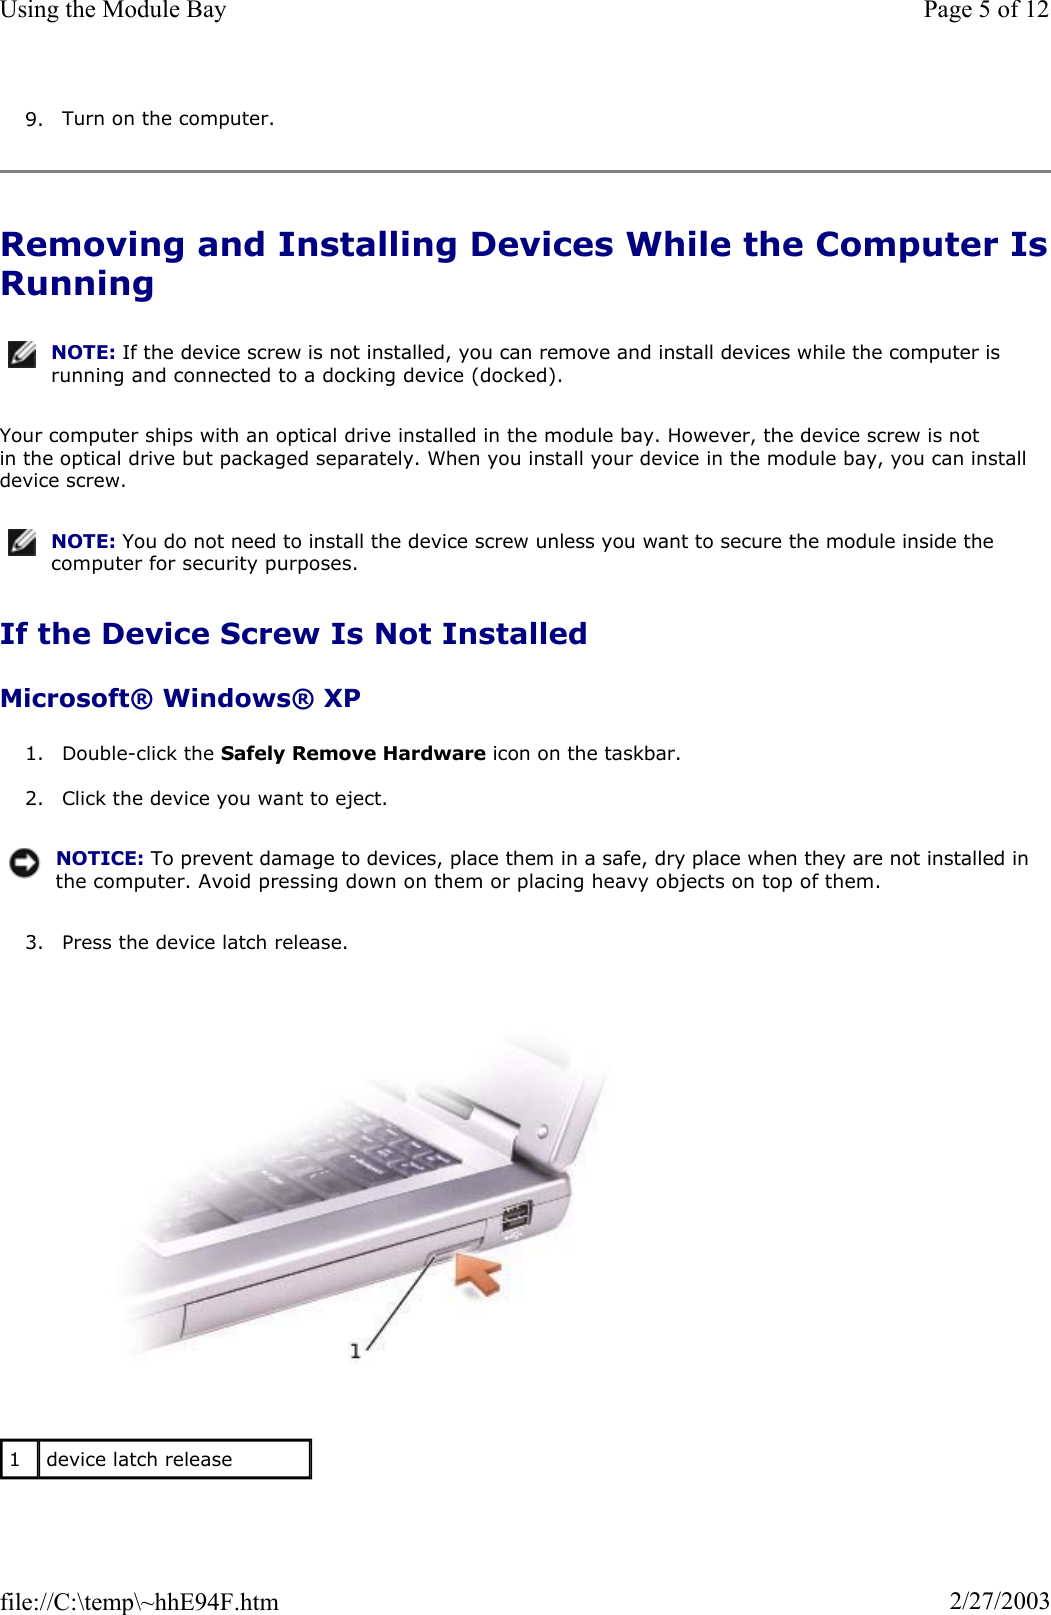 9. Turn on the computer. Removing and Installing Devices While the Computer IsRunningYour computer ships with an optical drive installed in the module bay. However, the device screw is not in the optical drive but packaged separately. When you install your device in the module bay, you can install device screw. If the Device Screw Is Not Installed Microsoft® Windows® XP 1. Double-click the Safely Remove Hardware icon on the taskbar. 2. Click the device you want to eject. 3. Press the device latch release. NOTE: If the device screw is not installed, you can remove and install devices while the computer is running and connected to a docking device (docked).NOTE: You do not need to install the device screw unless you want to secure the module inside the computer for security purposes.NOTICE: To prevent damage to devices, place them in a safe, dry place when they are not installed in the computer. Avoid pressing down on them or placing heavy objects on top of them.1device latch release Page 5 of 12Using the Module Bay2/27/2003file://C:\temp\~hhE94F.htm